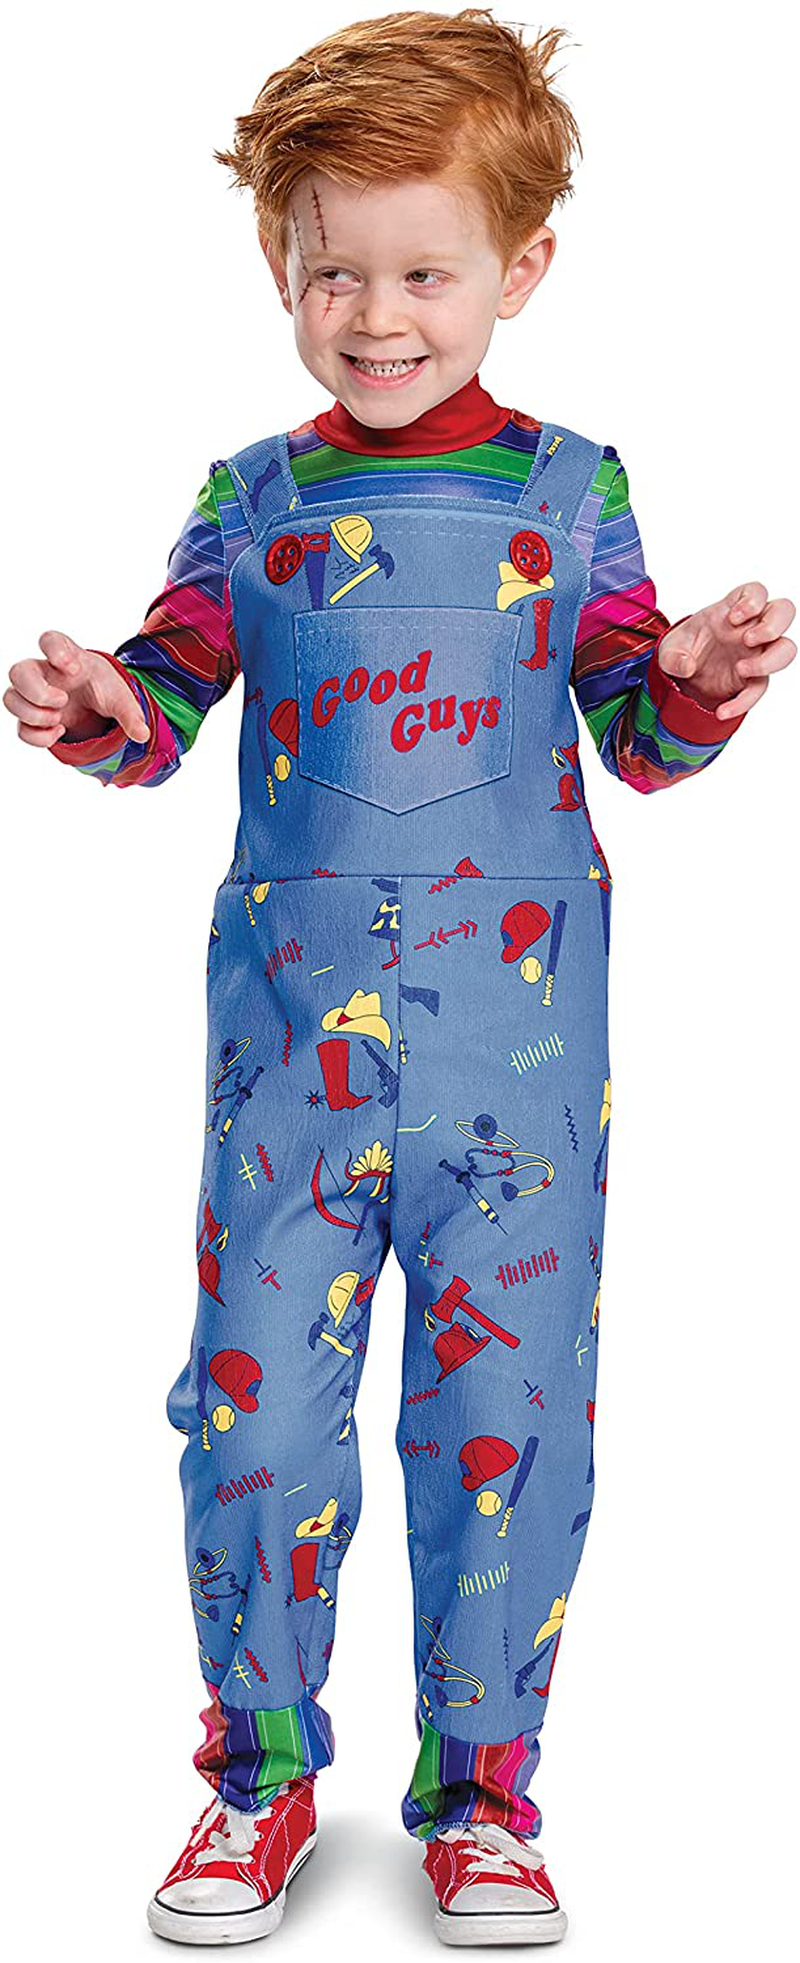 Chucky Costume for Kids, Official Childs Play Chucky Costume Jumpsuit Outfit, Classic Toddler Size Apparel & Accessories > Costumes & Accessories > Costumes Disguise Medium (4T)  